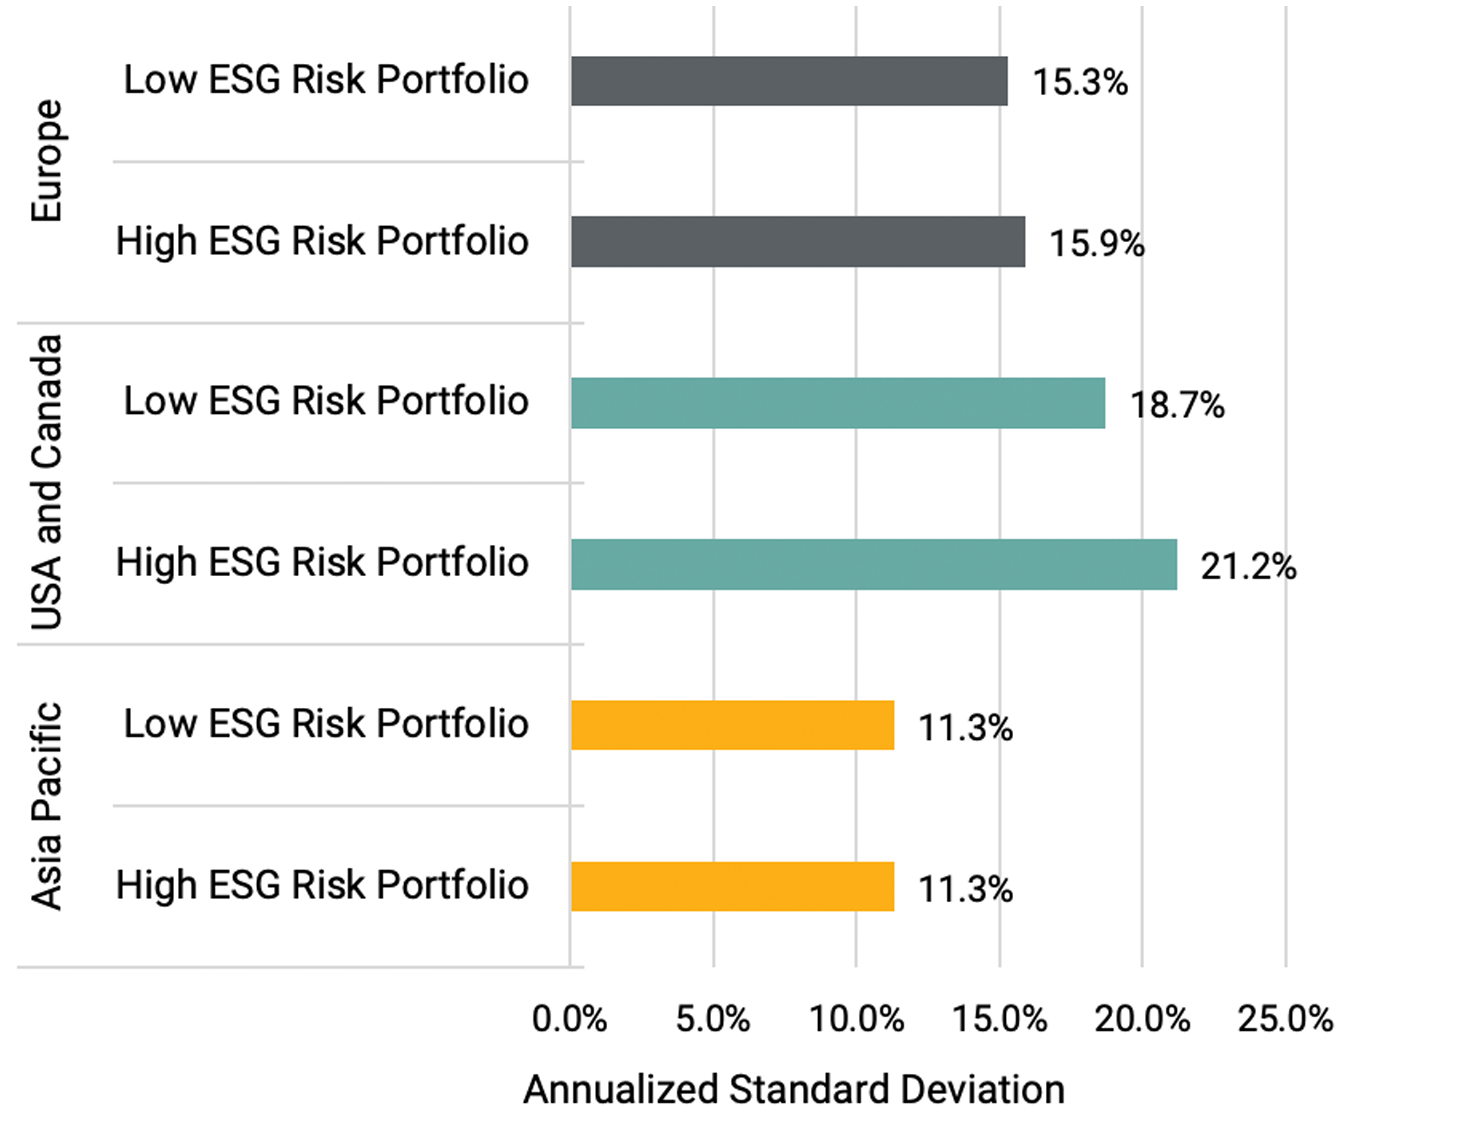 Bar chart showing standard deviation for low-ESG-risk and high-ESG-risk portfolios in Europe, the USA and Canada, and Asia Pacific.